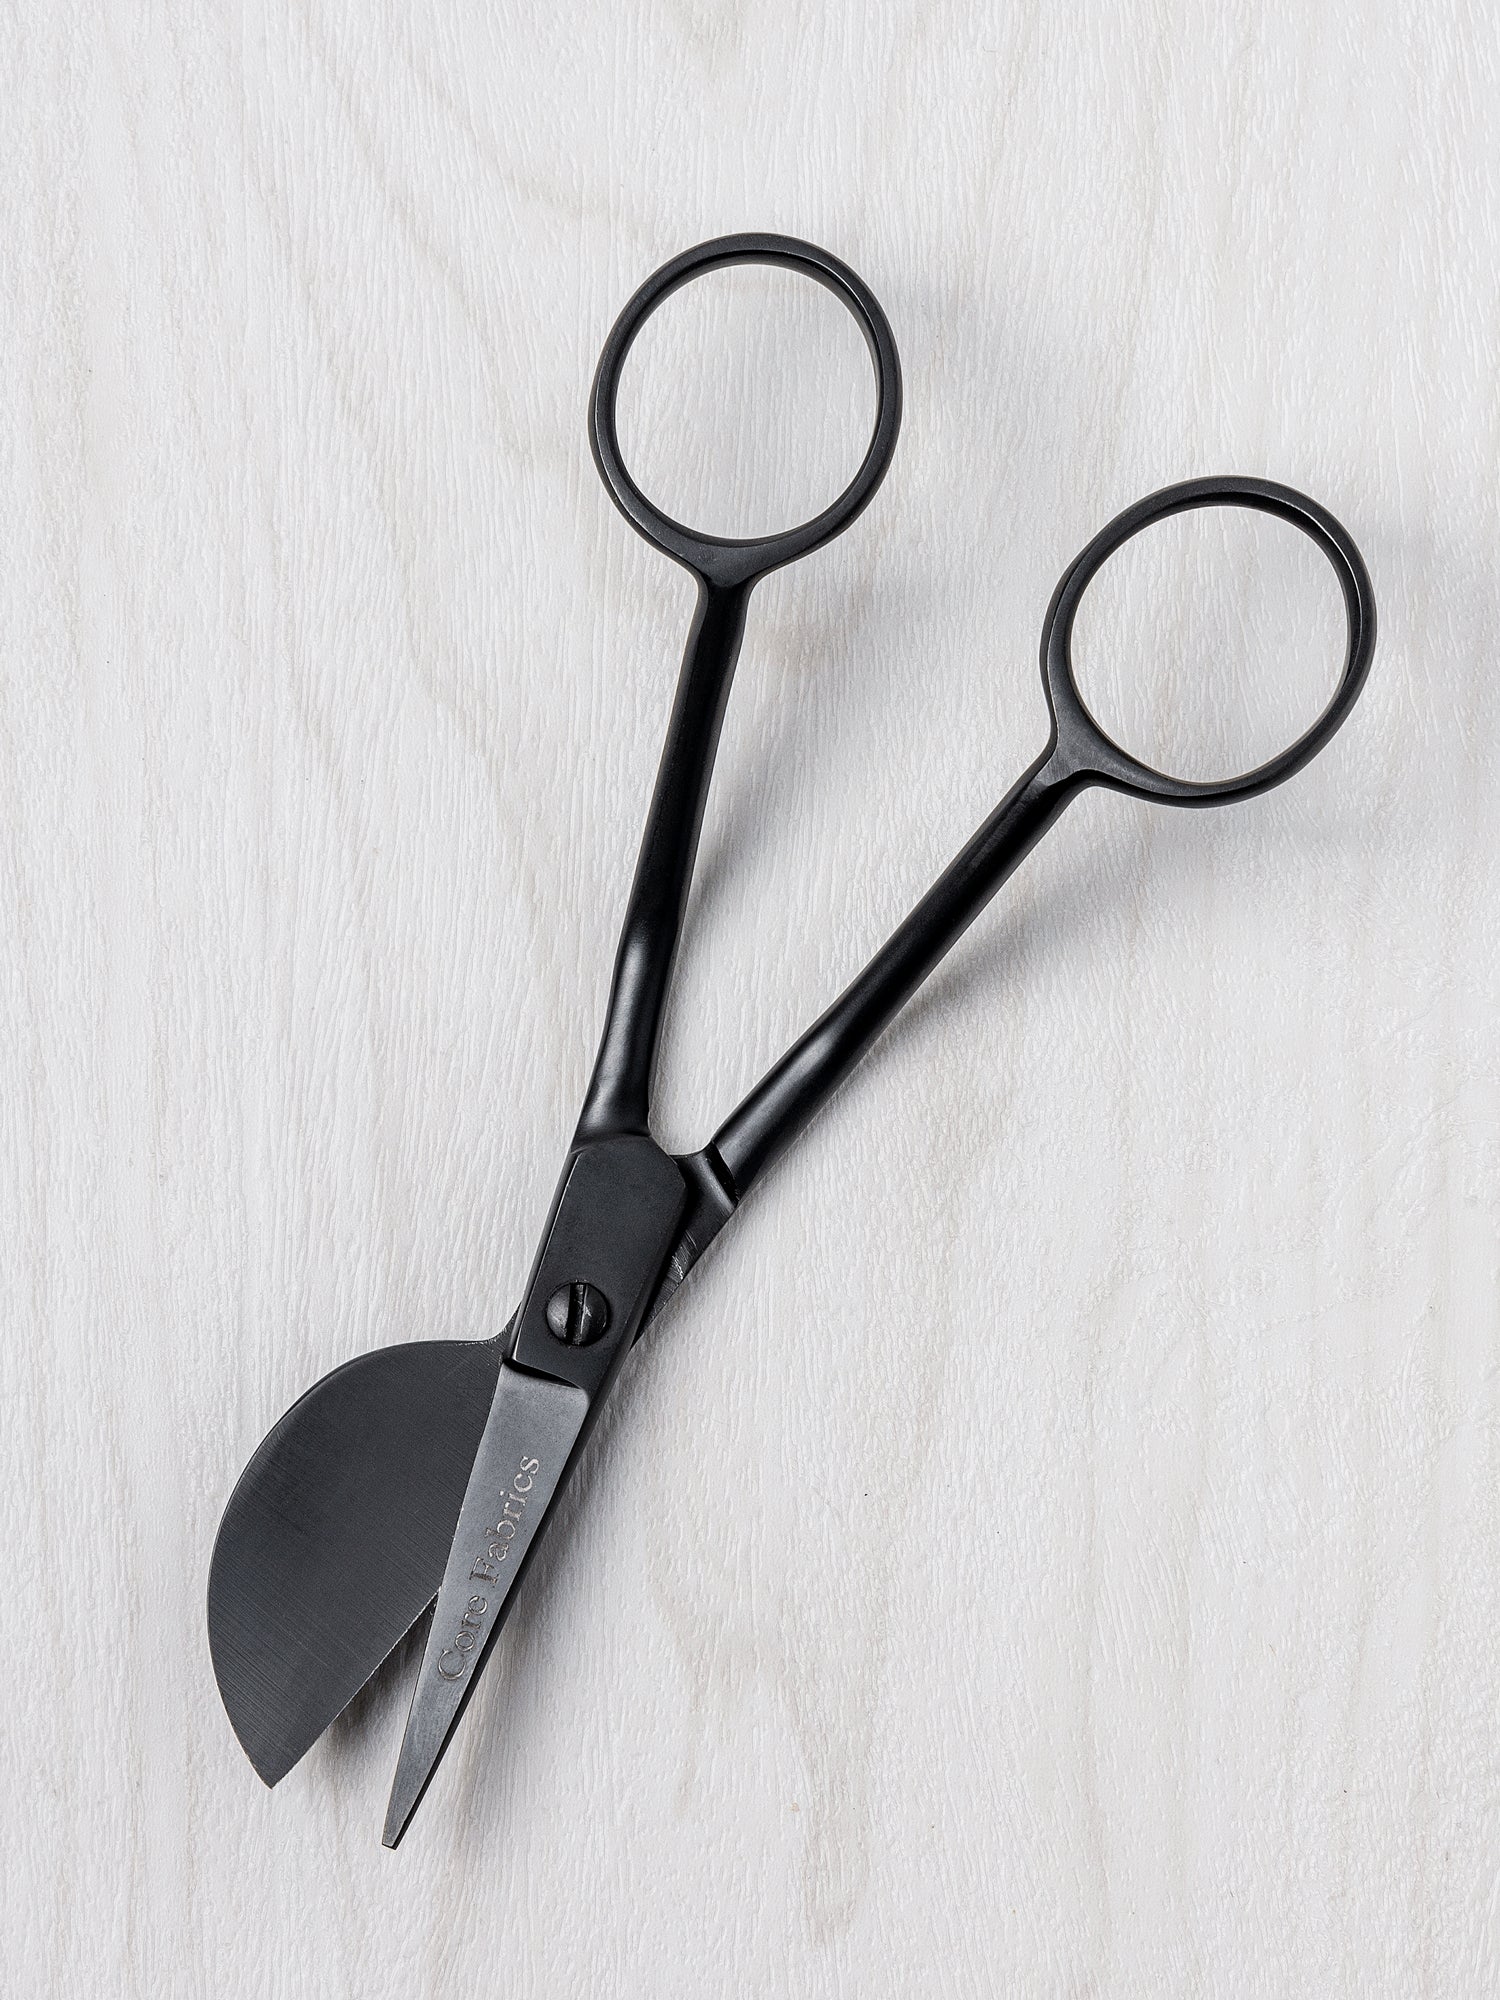 Highly Durable Left Handed Beauty Scissors